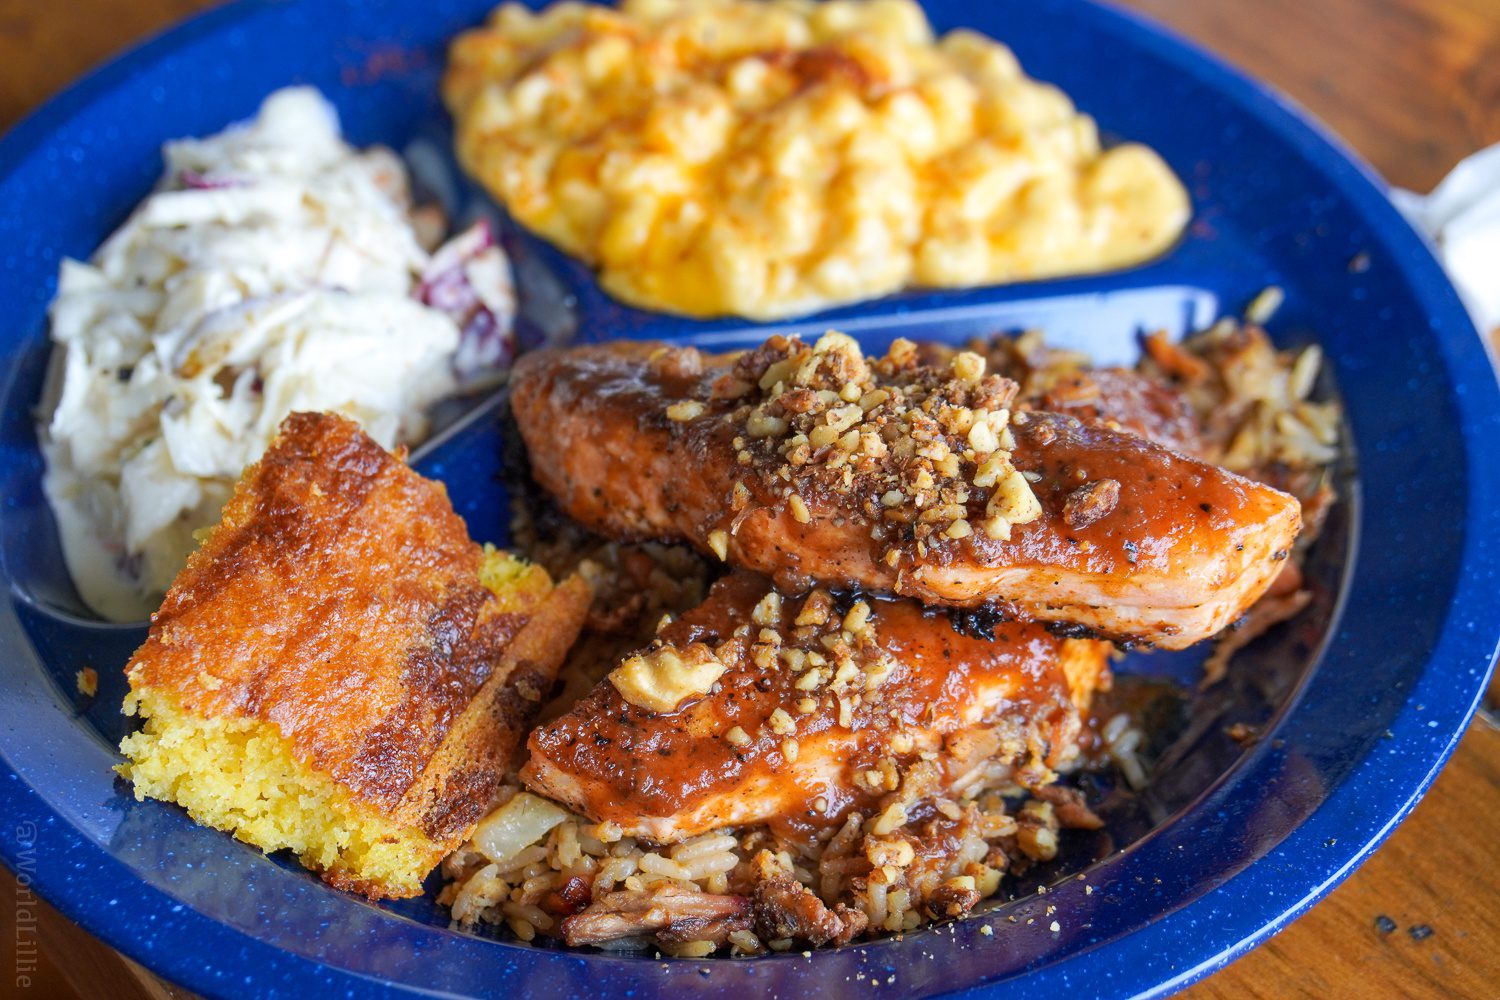 The Jerk Salmon plate with mac and slaw.